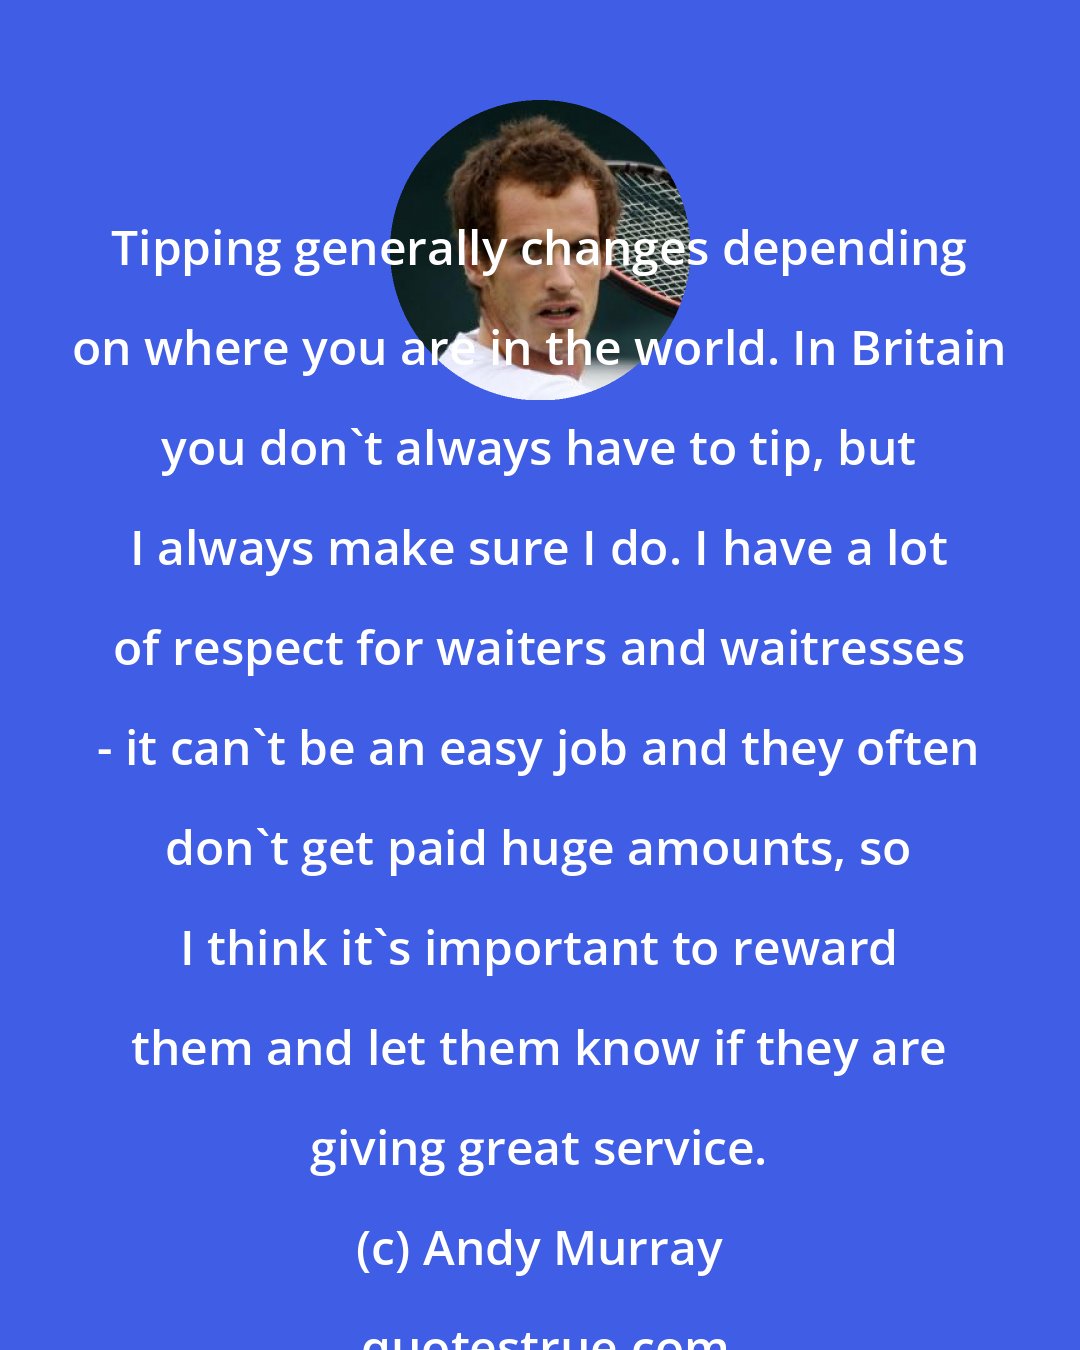 Andy Murray: Tipping generally changes depending on where you are in the world. In Britain you don't always have to tip, but I always make sure I do. I have a lot of respect for waiters and waitresses - it can't be an easy job and they often don't get paid huge amounts, so I think it's important to reward them and let them know if they are giving great service.